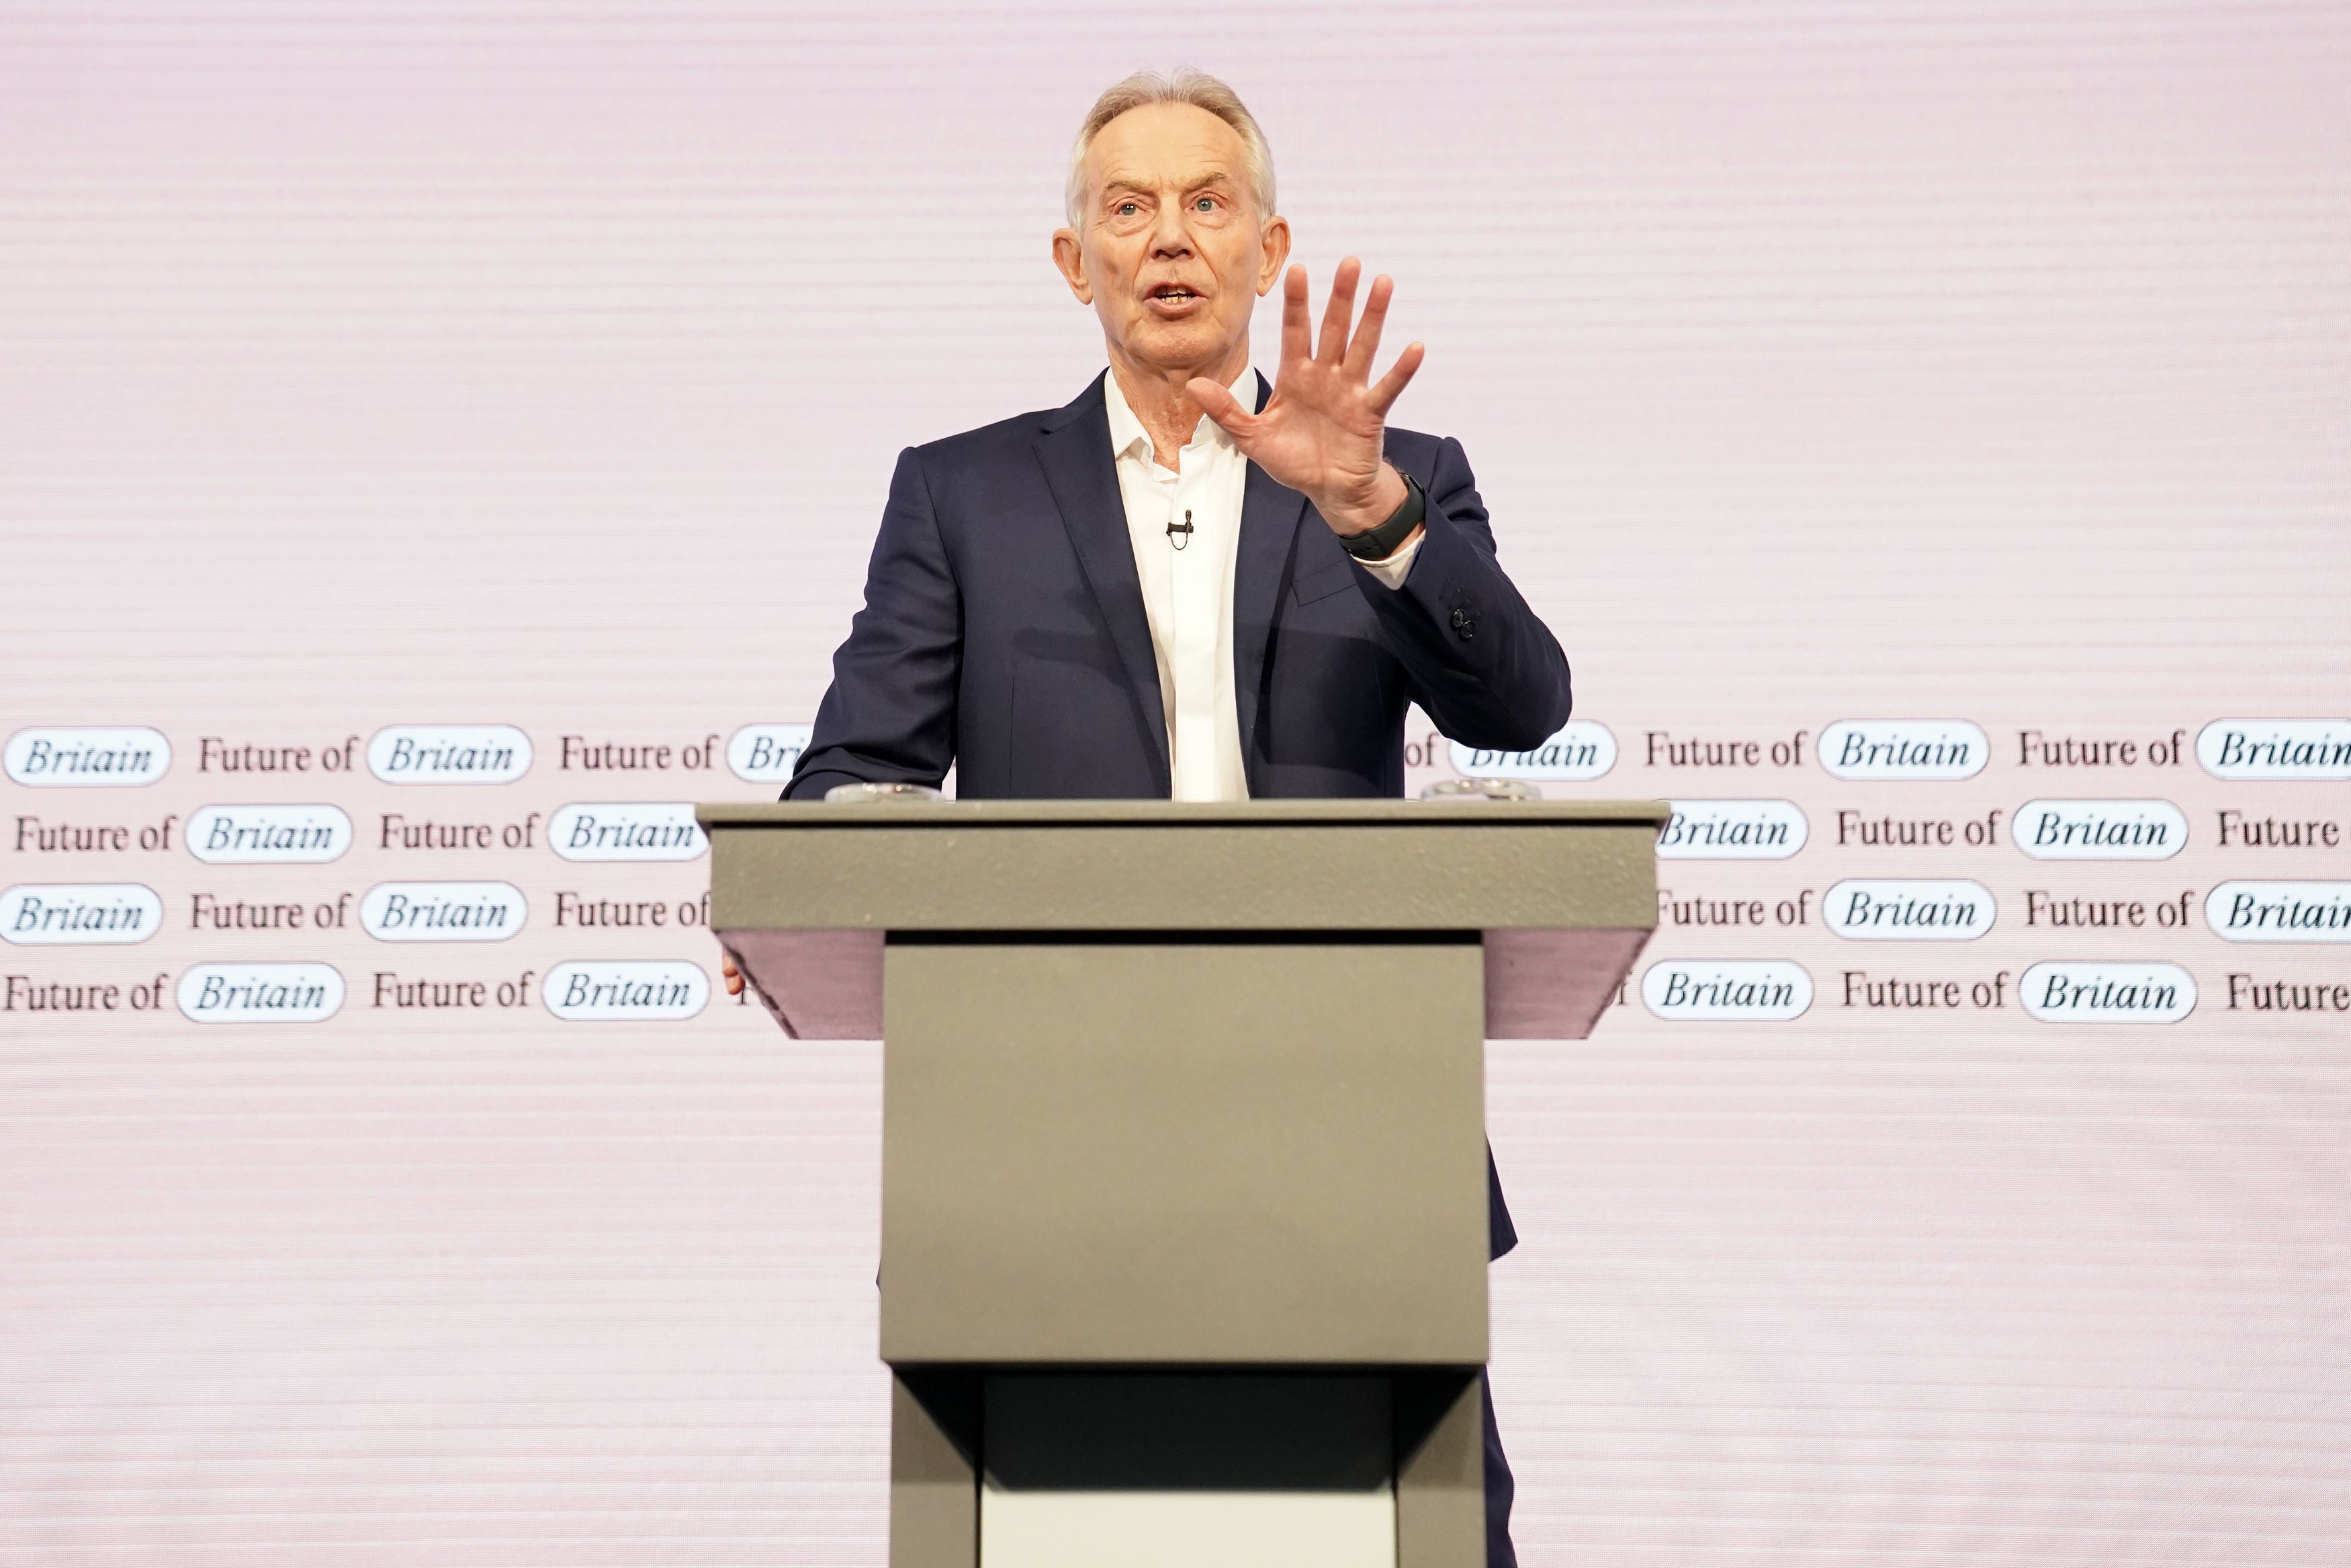 Blair is correct – this country has limited itself